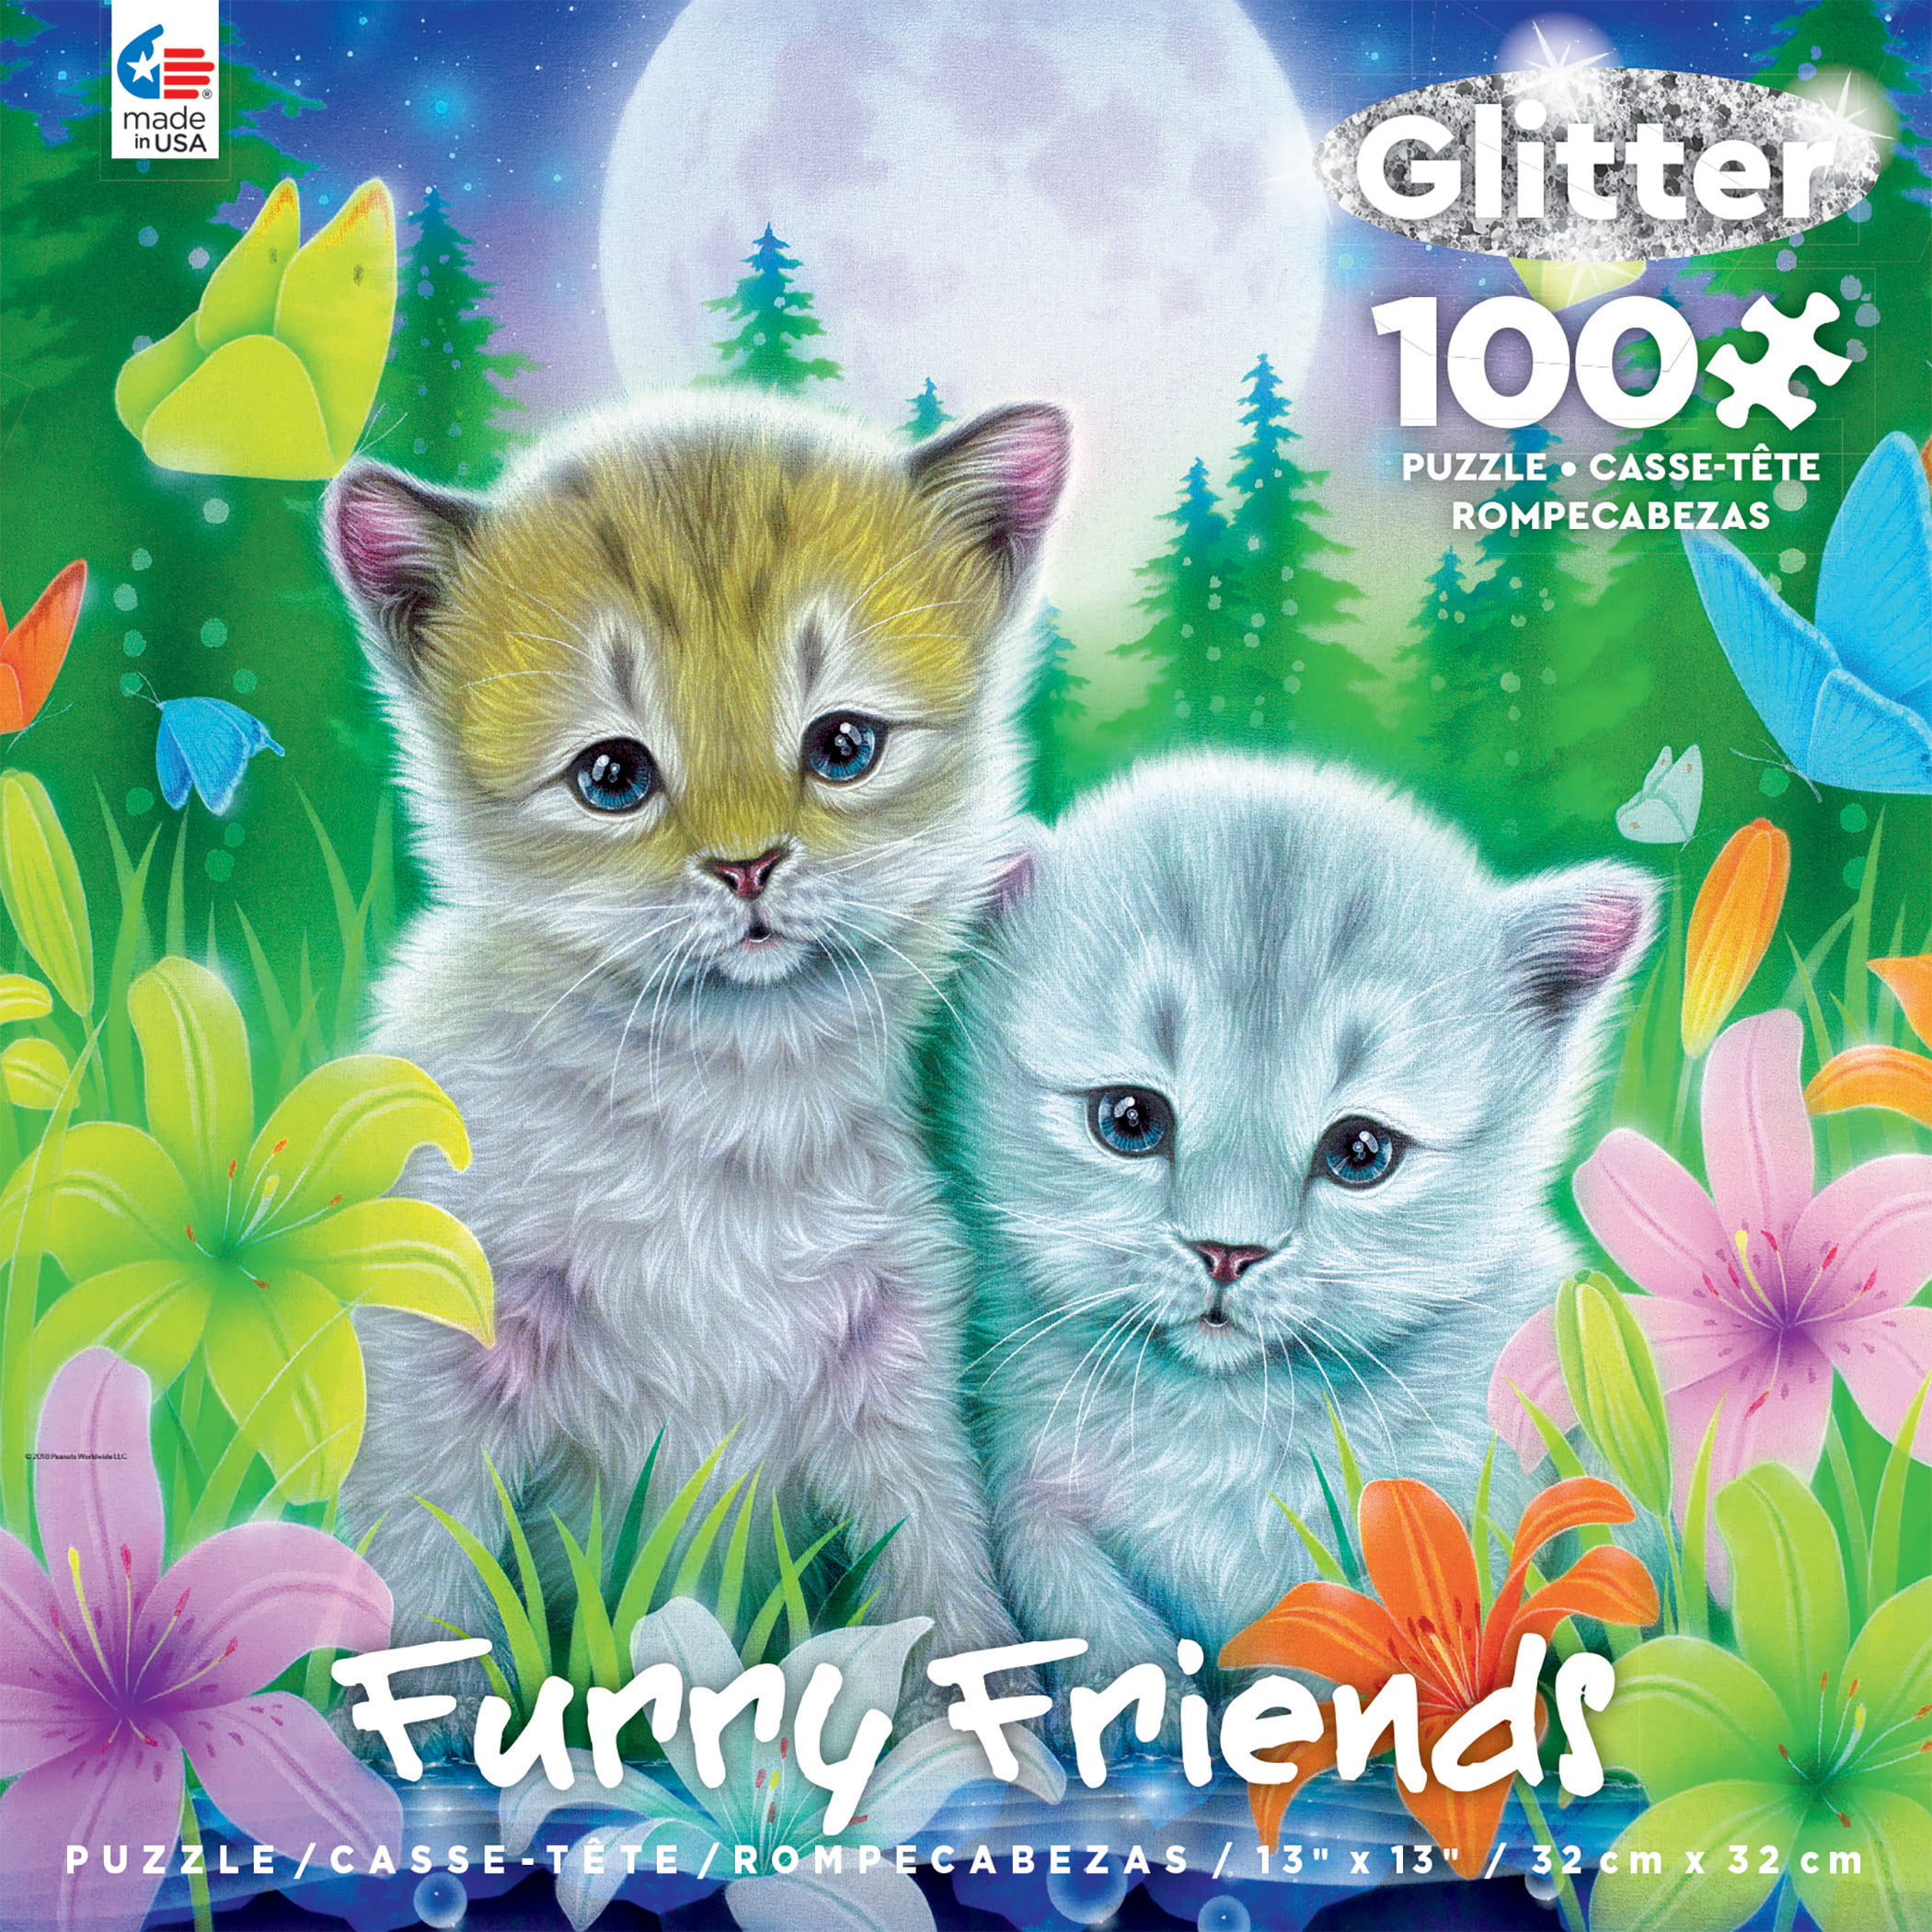 Cute Kitten New 100 Piece Jigsaw Puzzle Great for kids and adults!! 